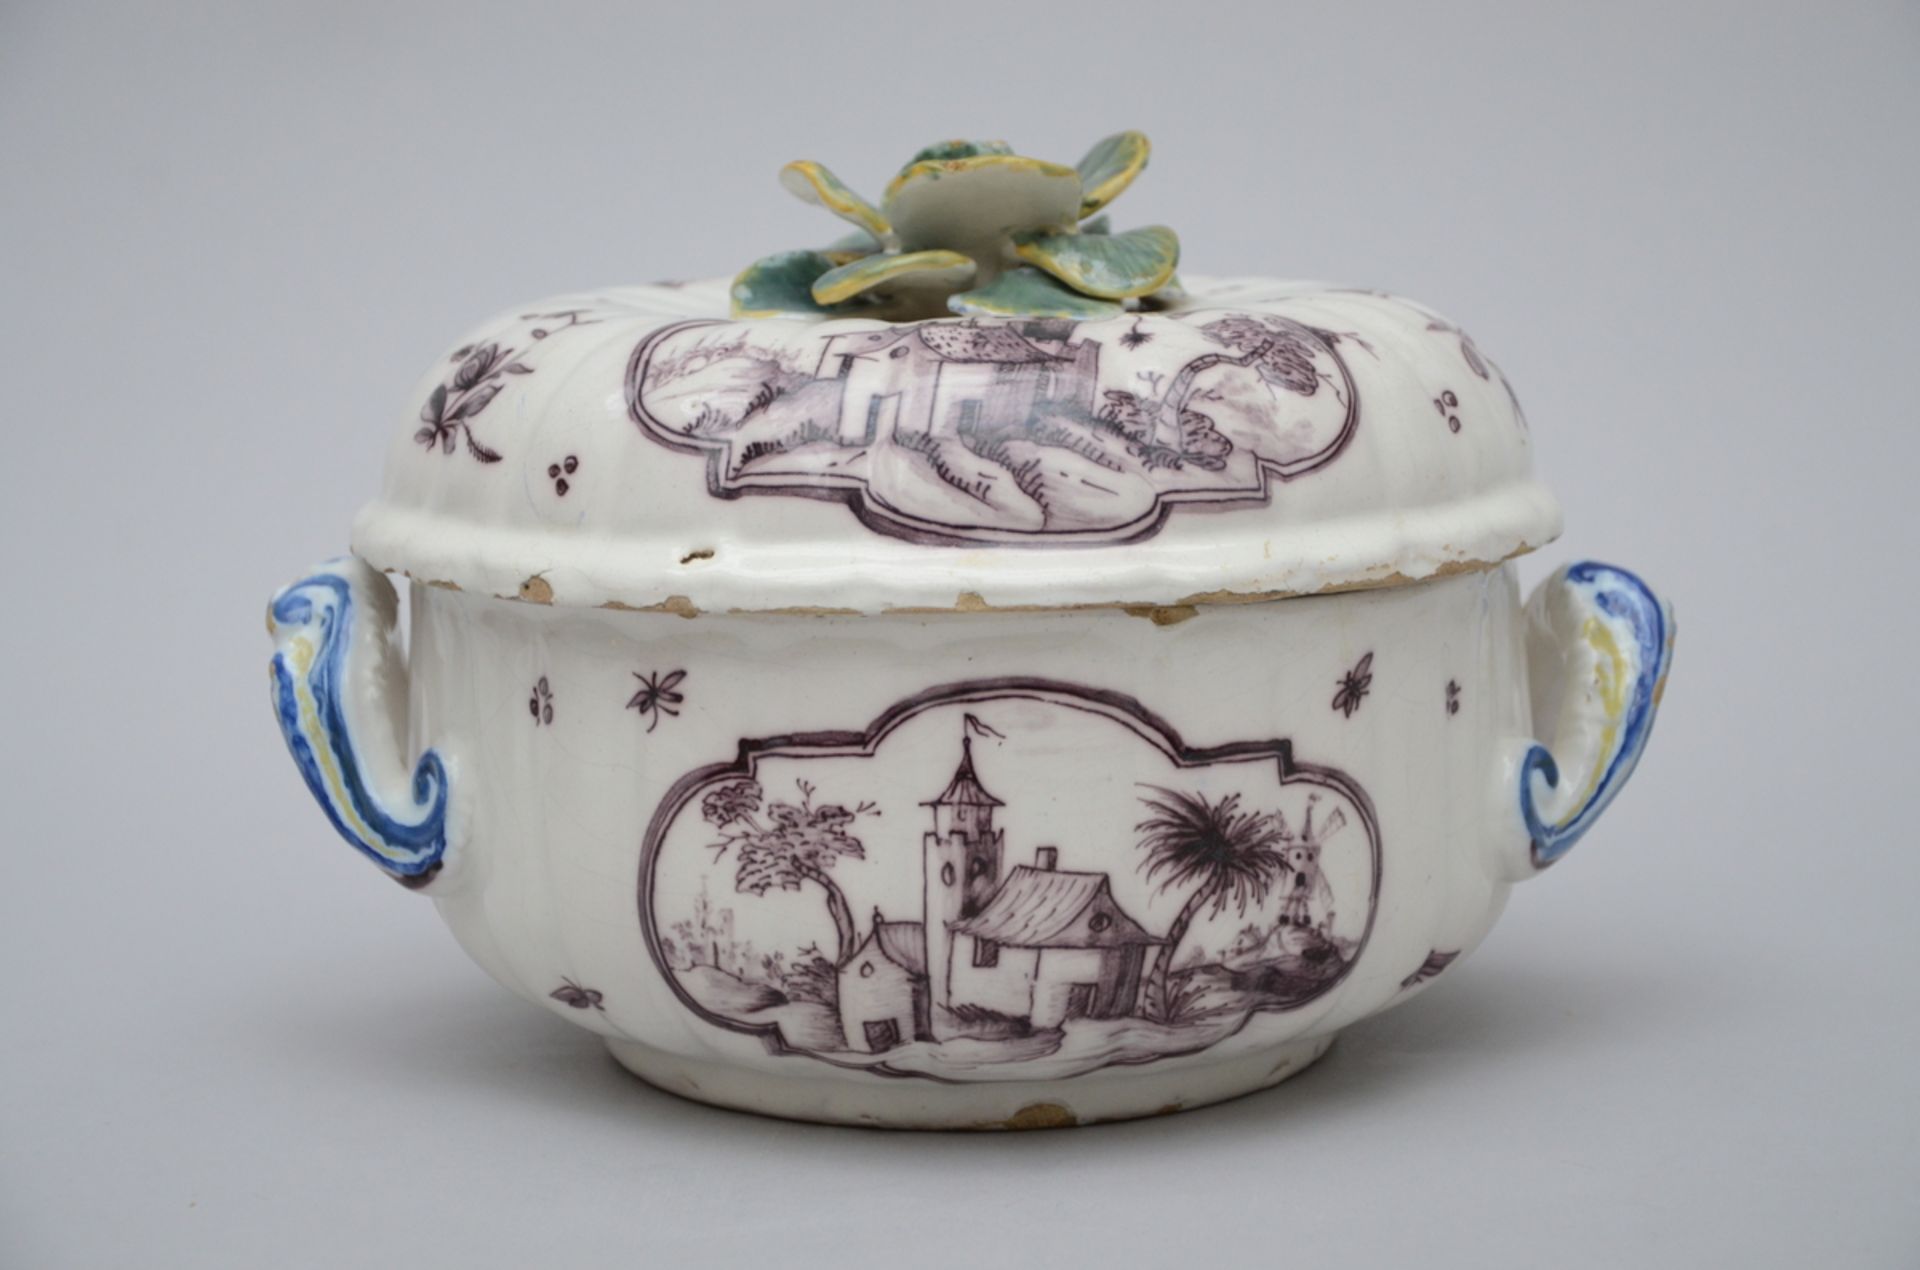 A 'manganèse' tureen in faience from Saint-Omer, 18th century (18x23 cm)